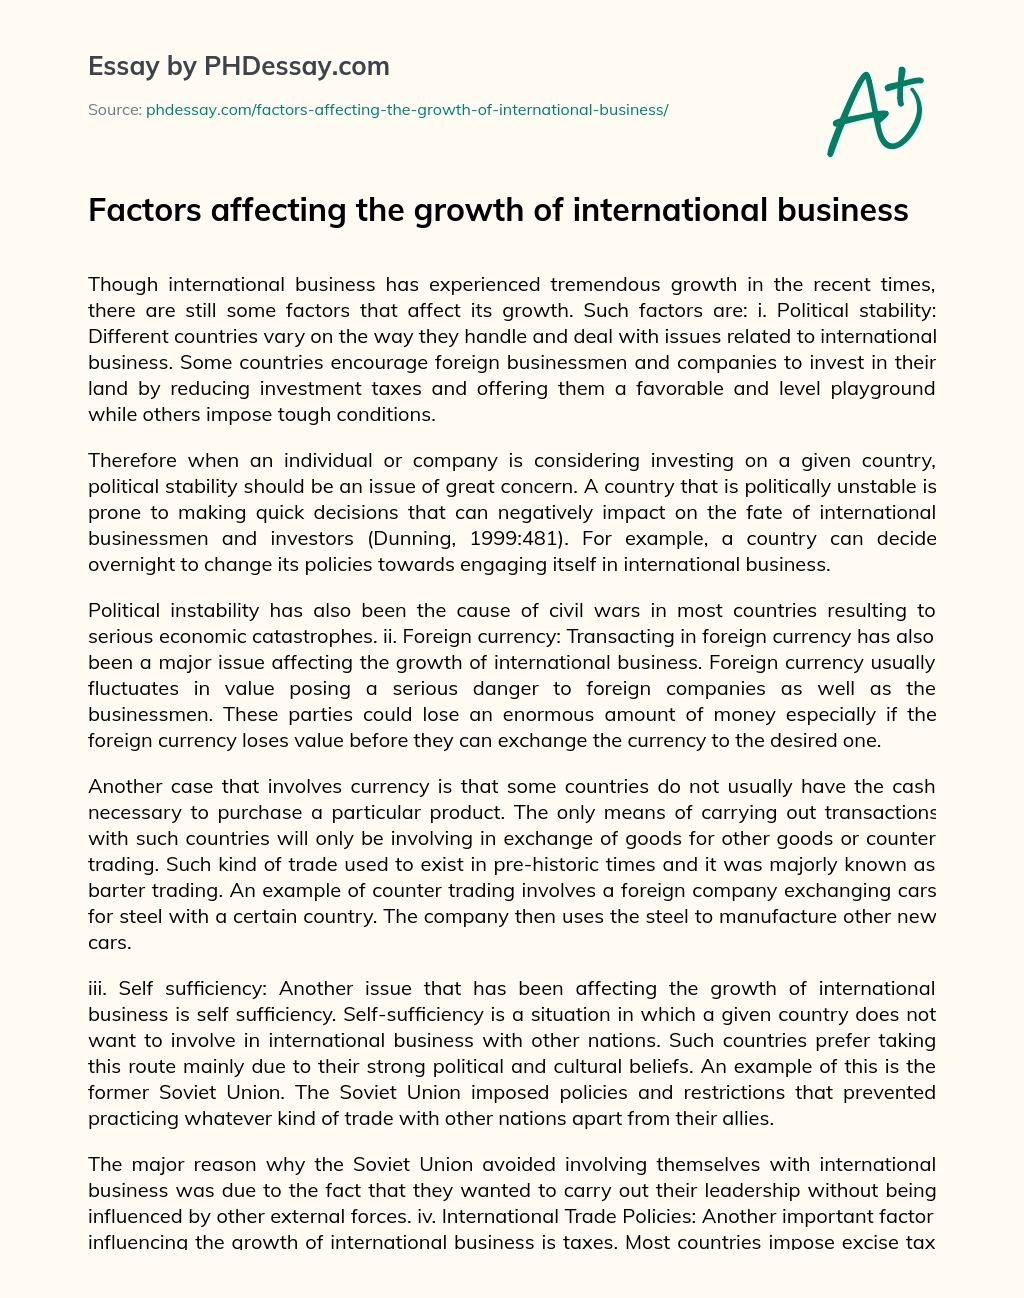 Factors affecting the growth of international business essay